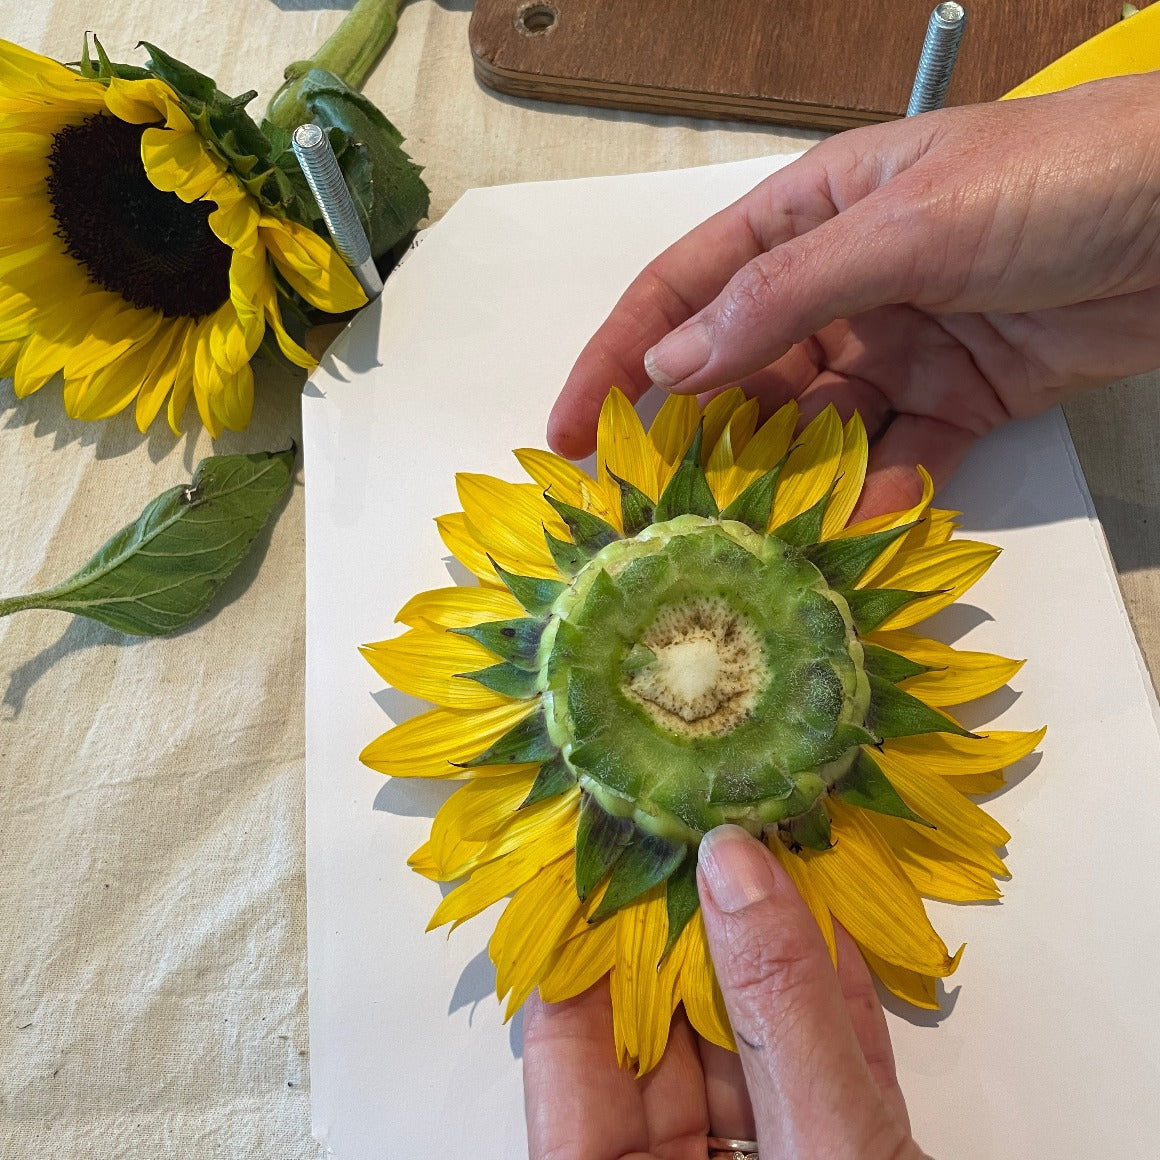 learn how to press a sunflower whole, preserve a sunflower